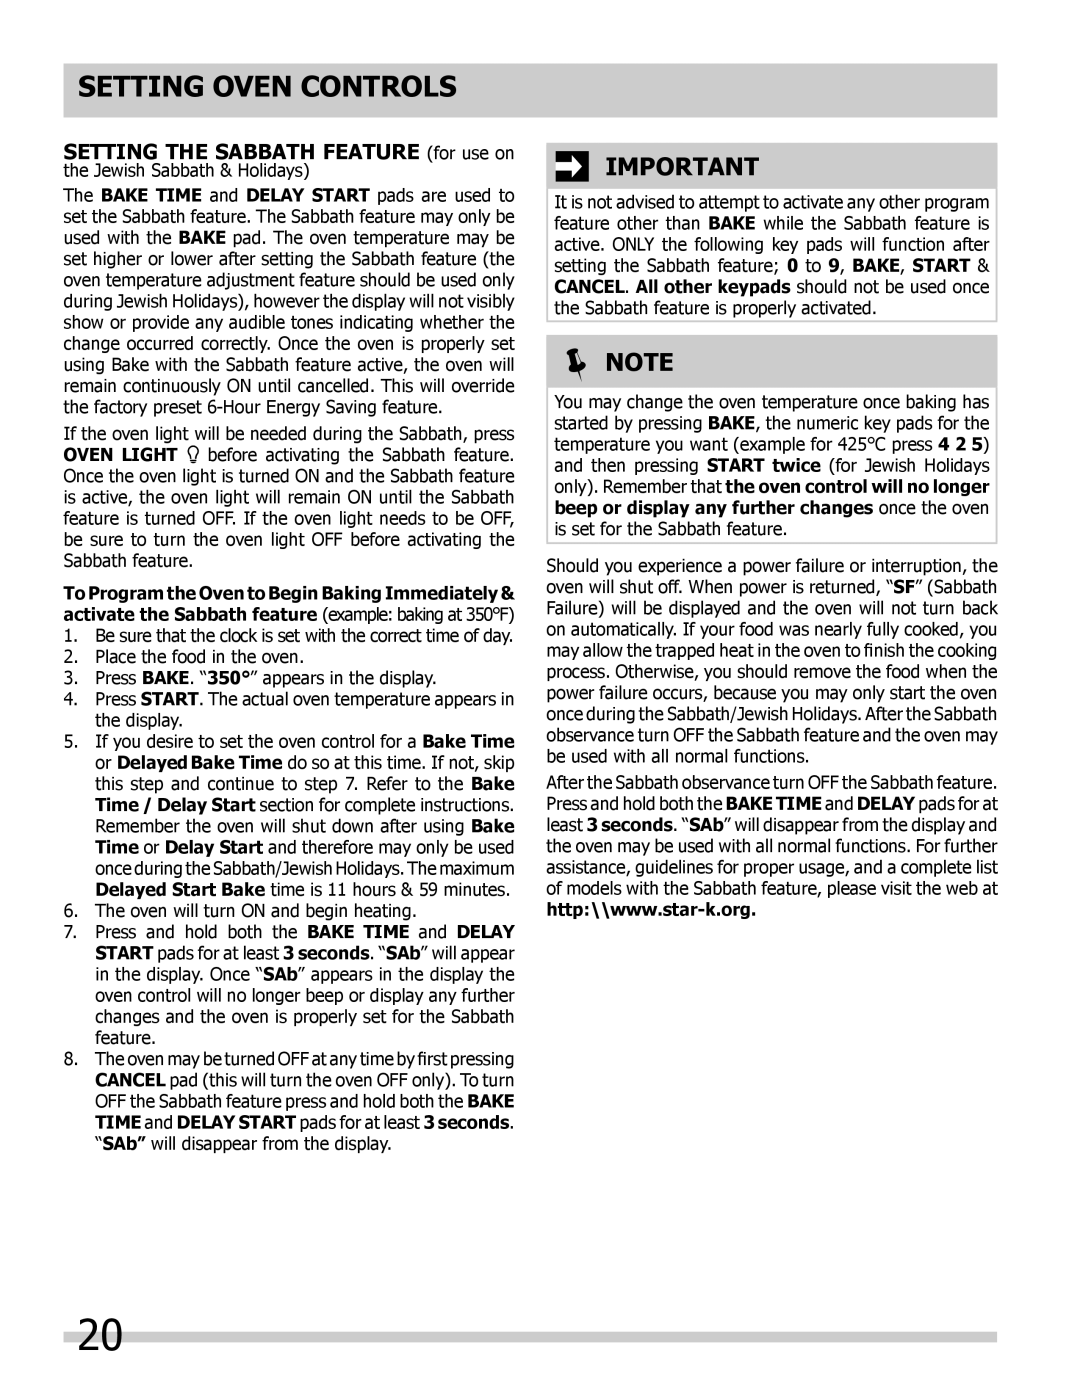 Frigidaire 318205307 important safety instructions Setting Oven Controls,  Note 